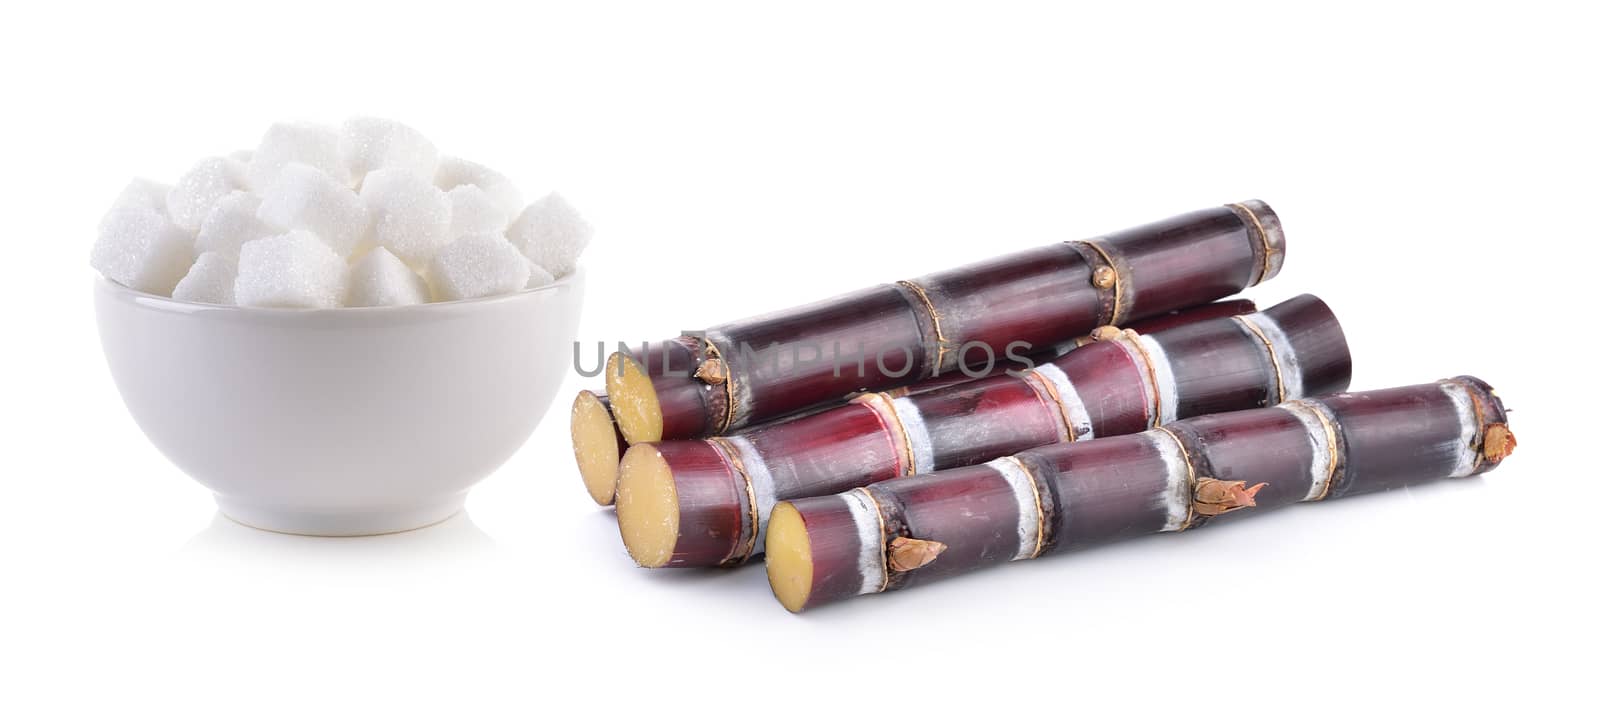 sugarcane and sugar cube on white background by sommai